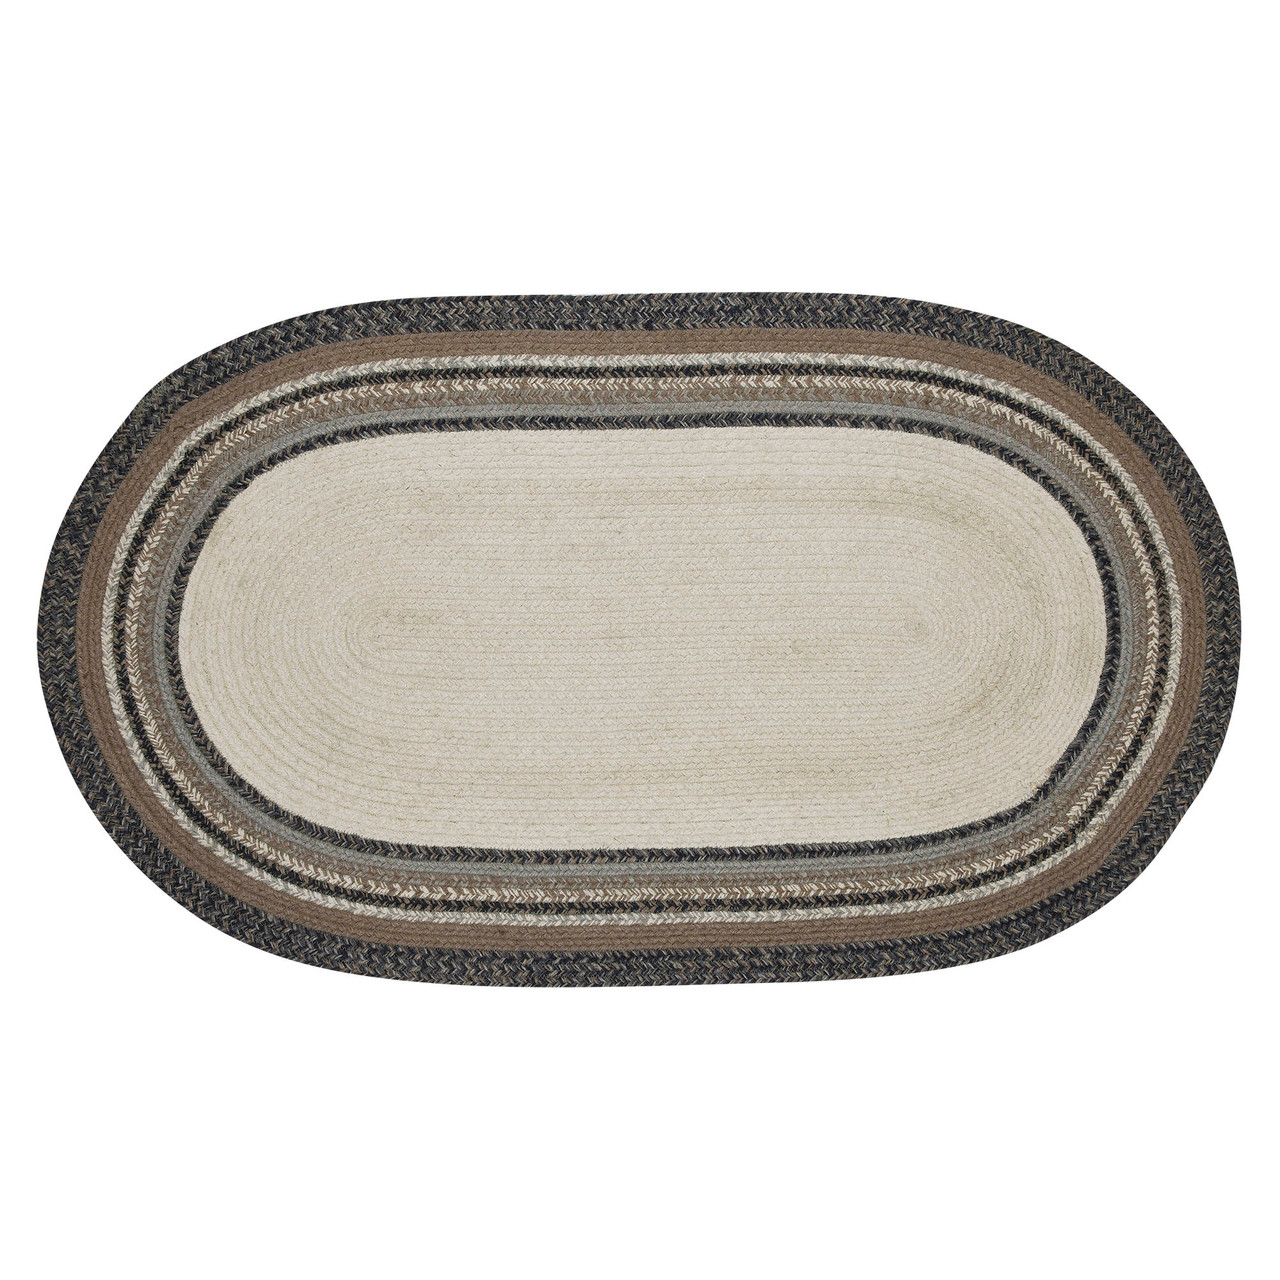 VHC Brands Braided Rug - Floral Vine Jute Rug Oval Welcome with Pad 27x48